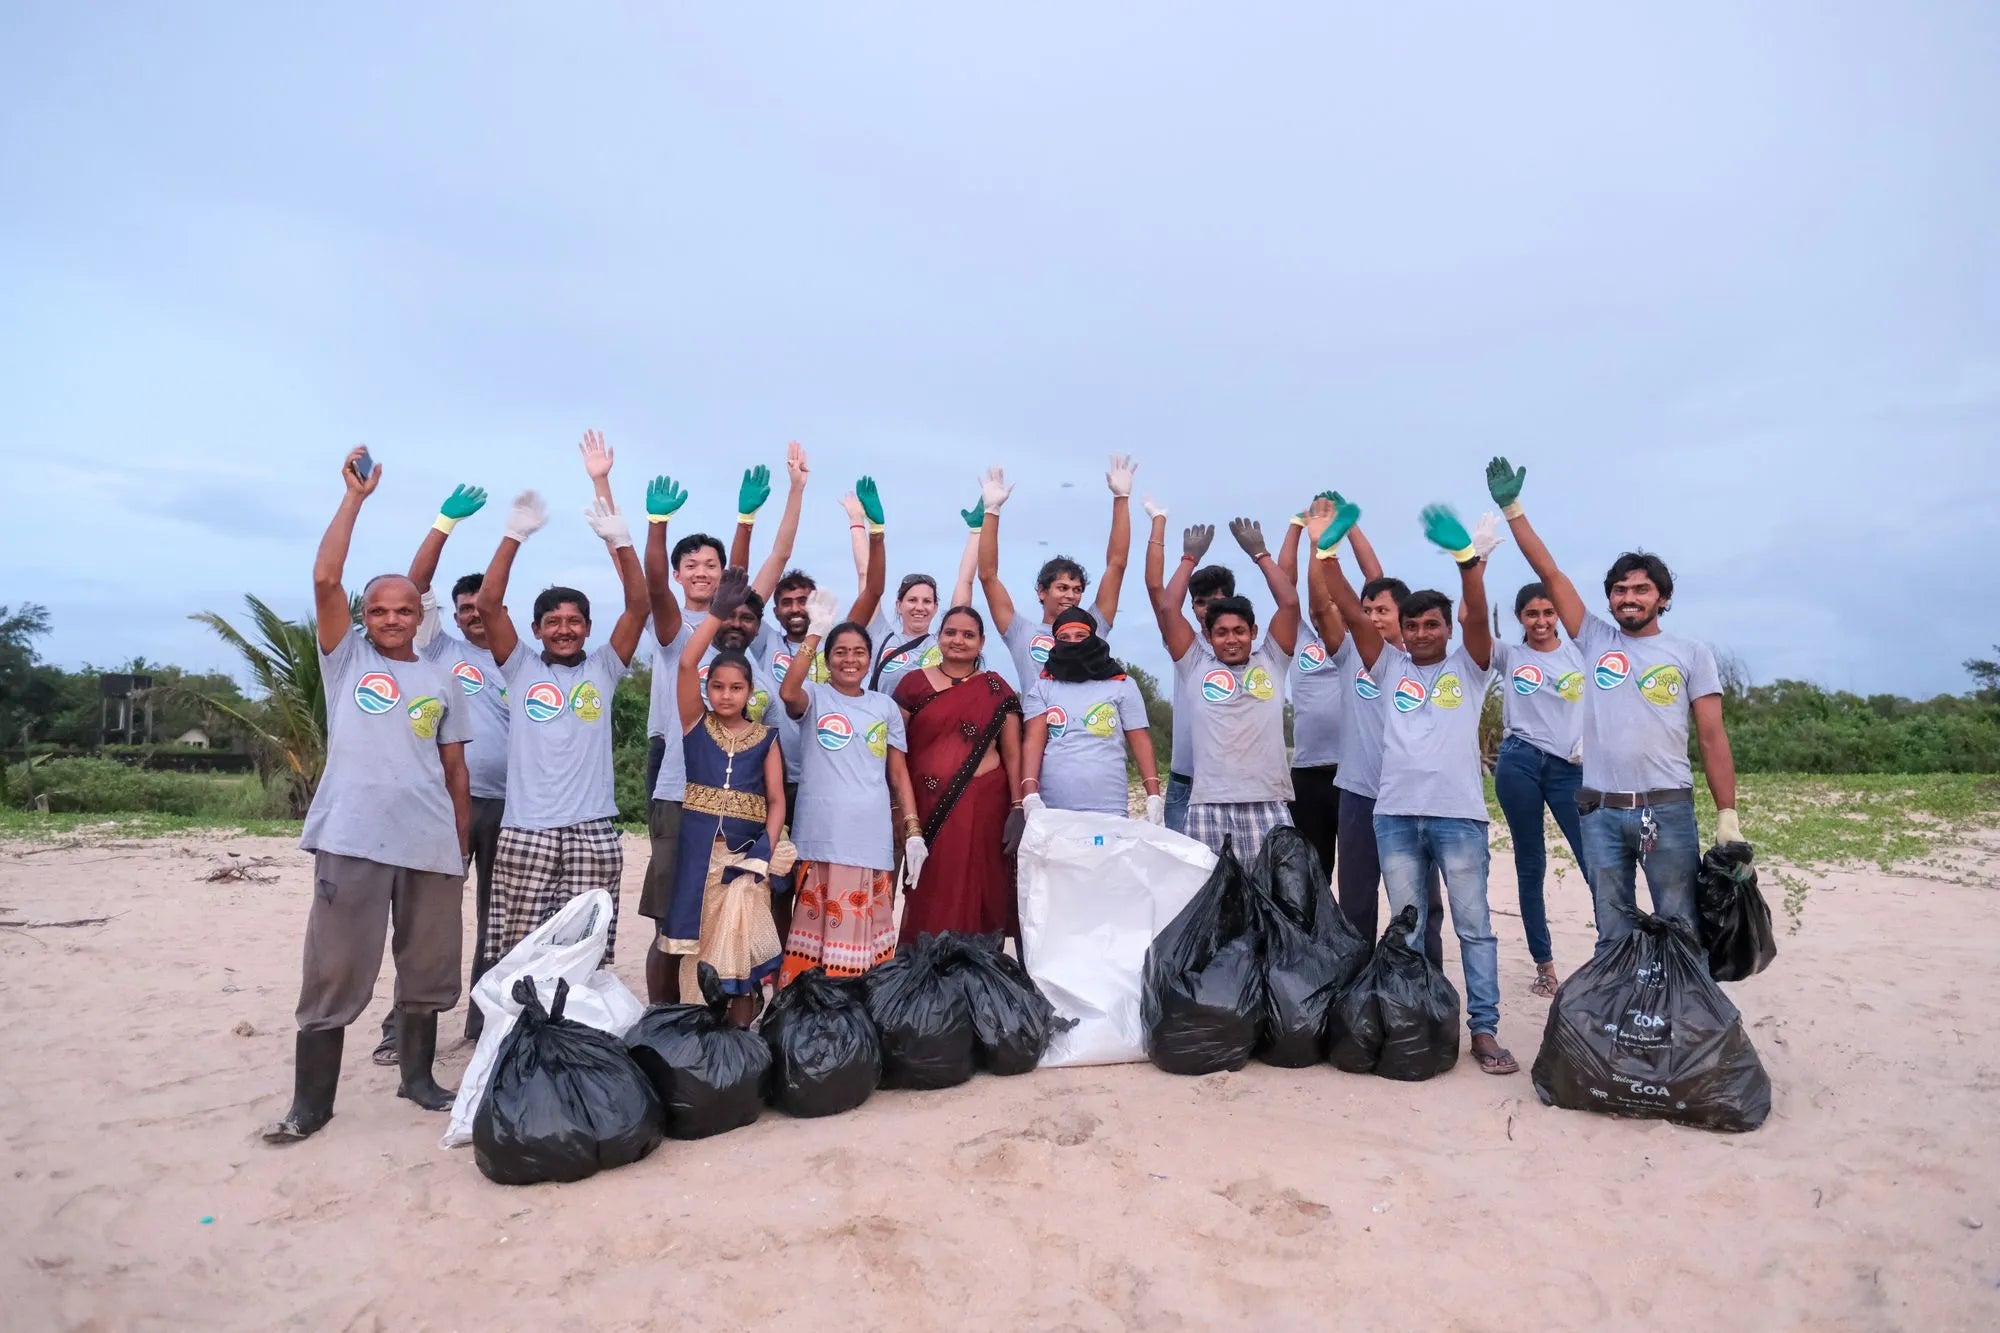 An image of a group of people celebrating collecting rubbish from a beach